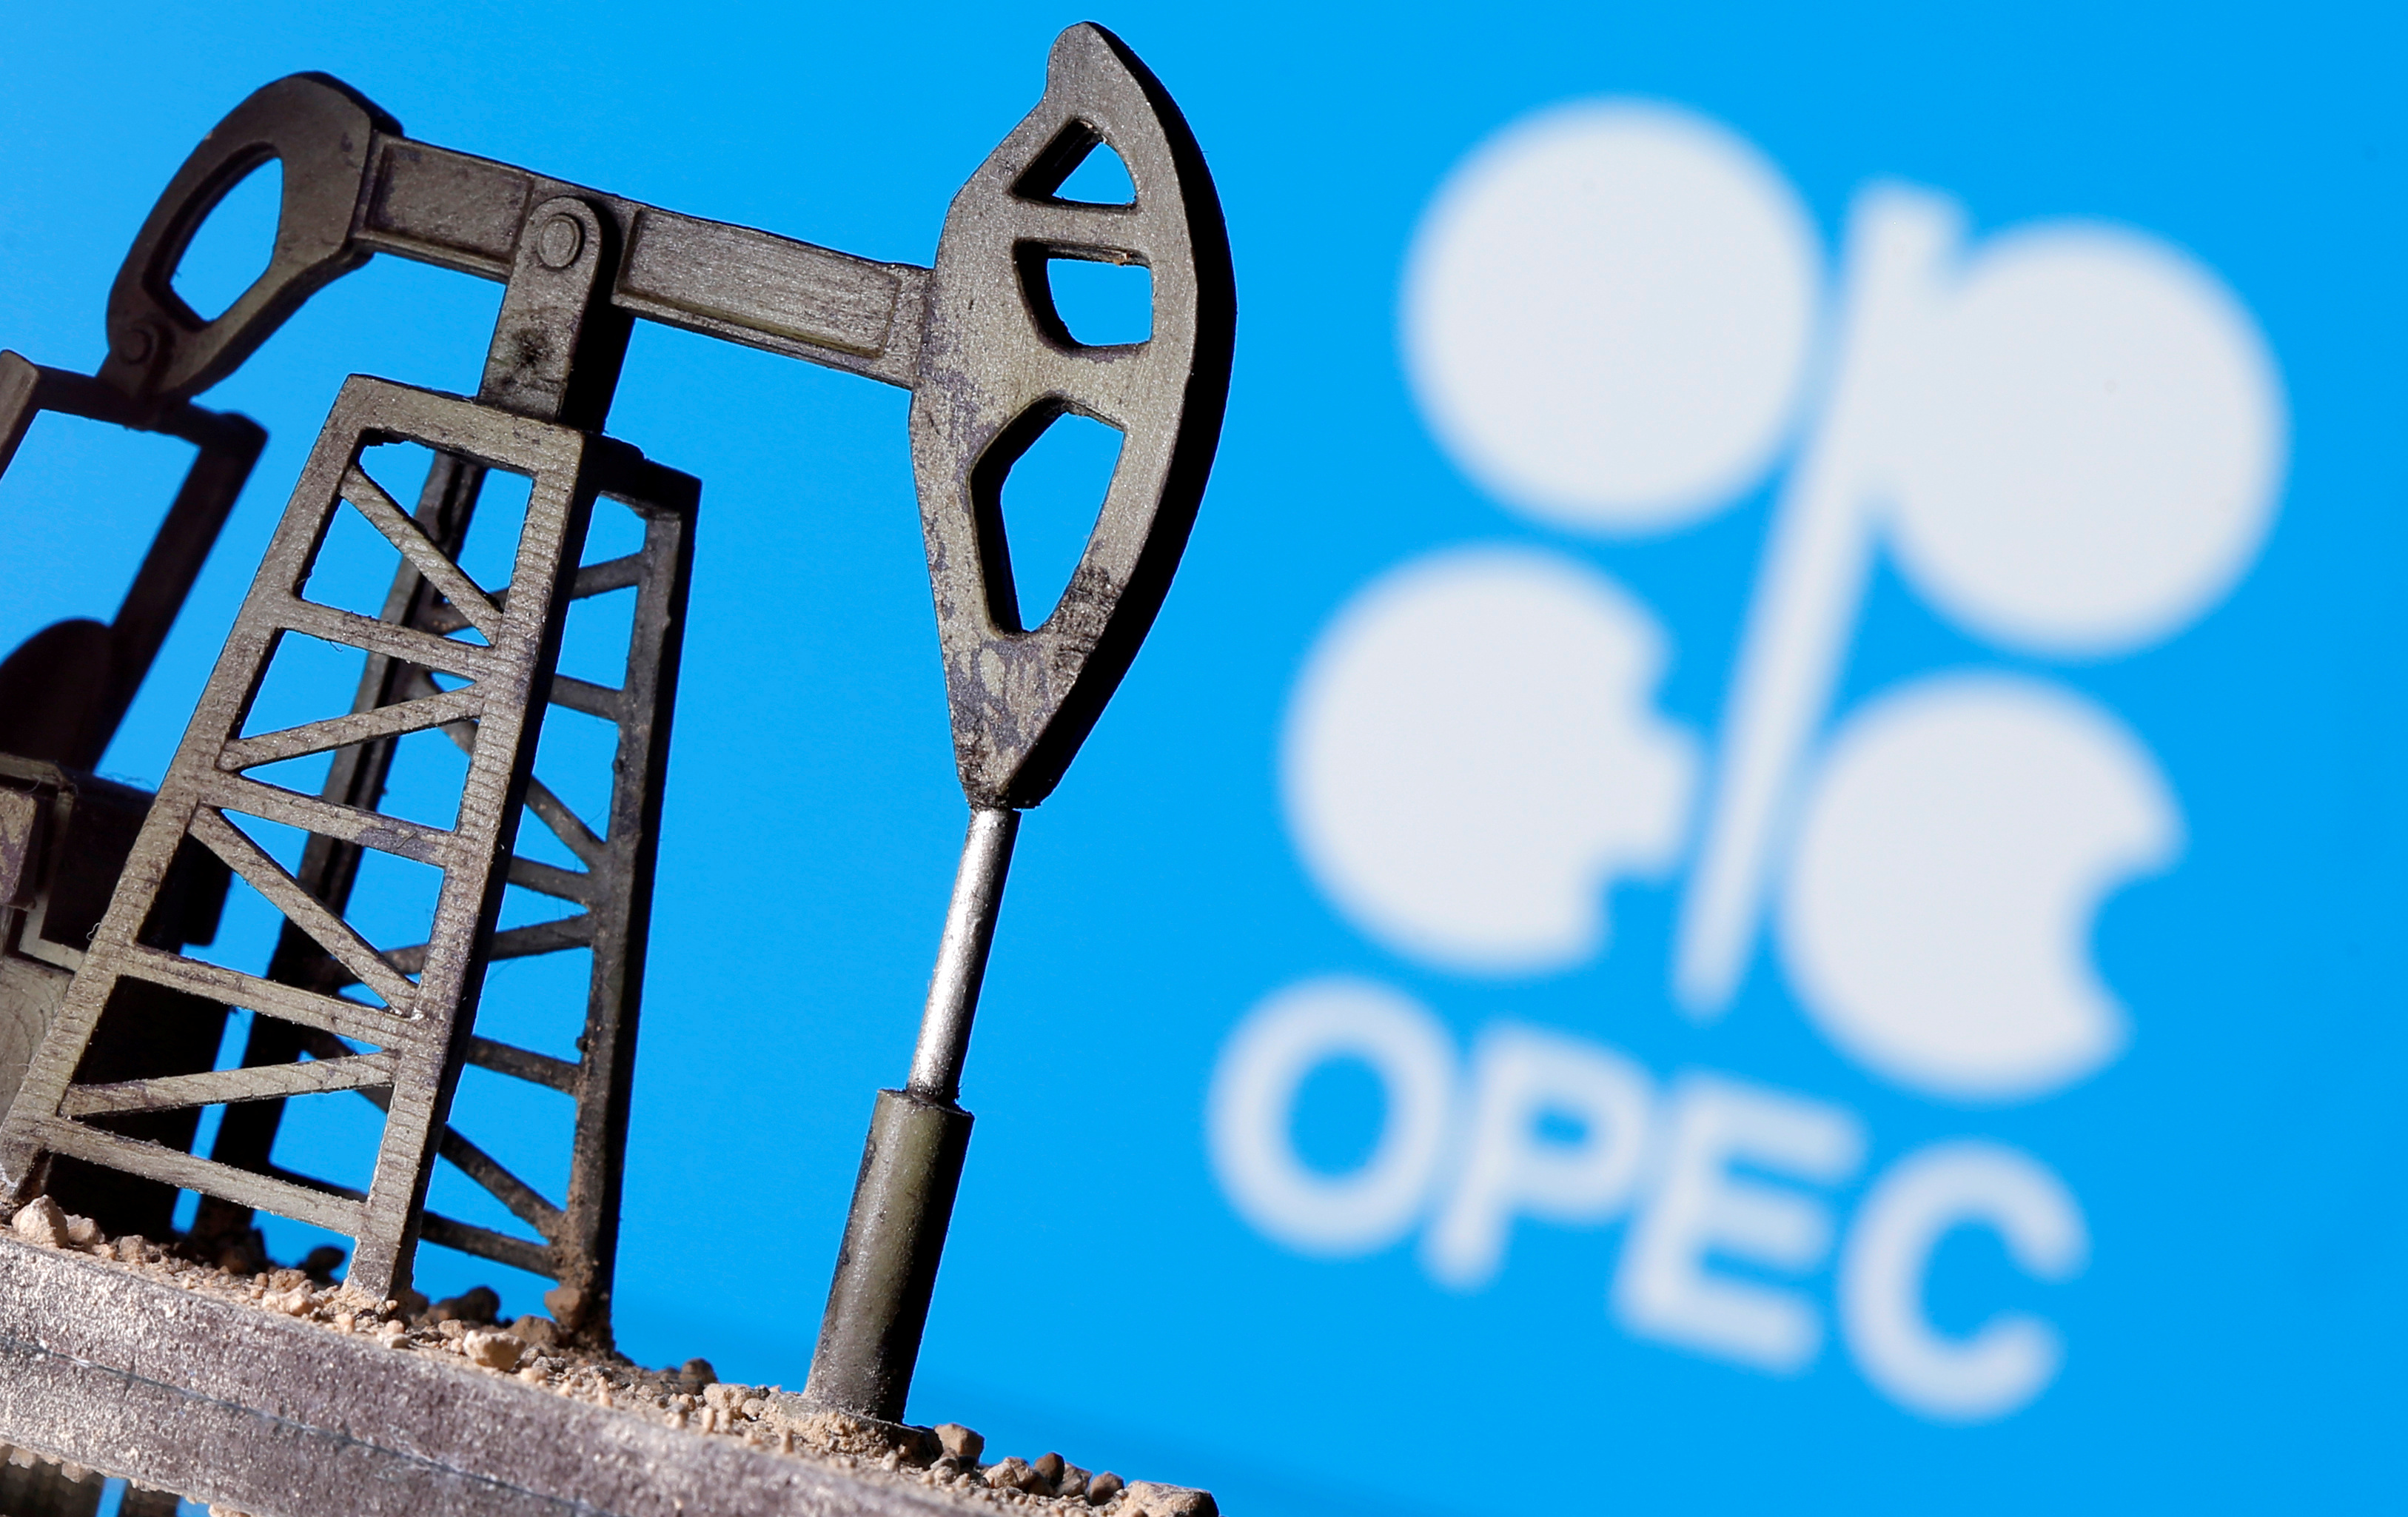 A 3D printed oil pump jack is seen in front of displayed Opec logo in this illustration picture